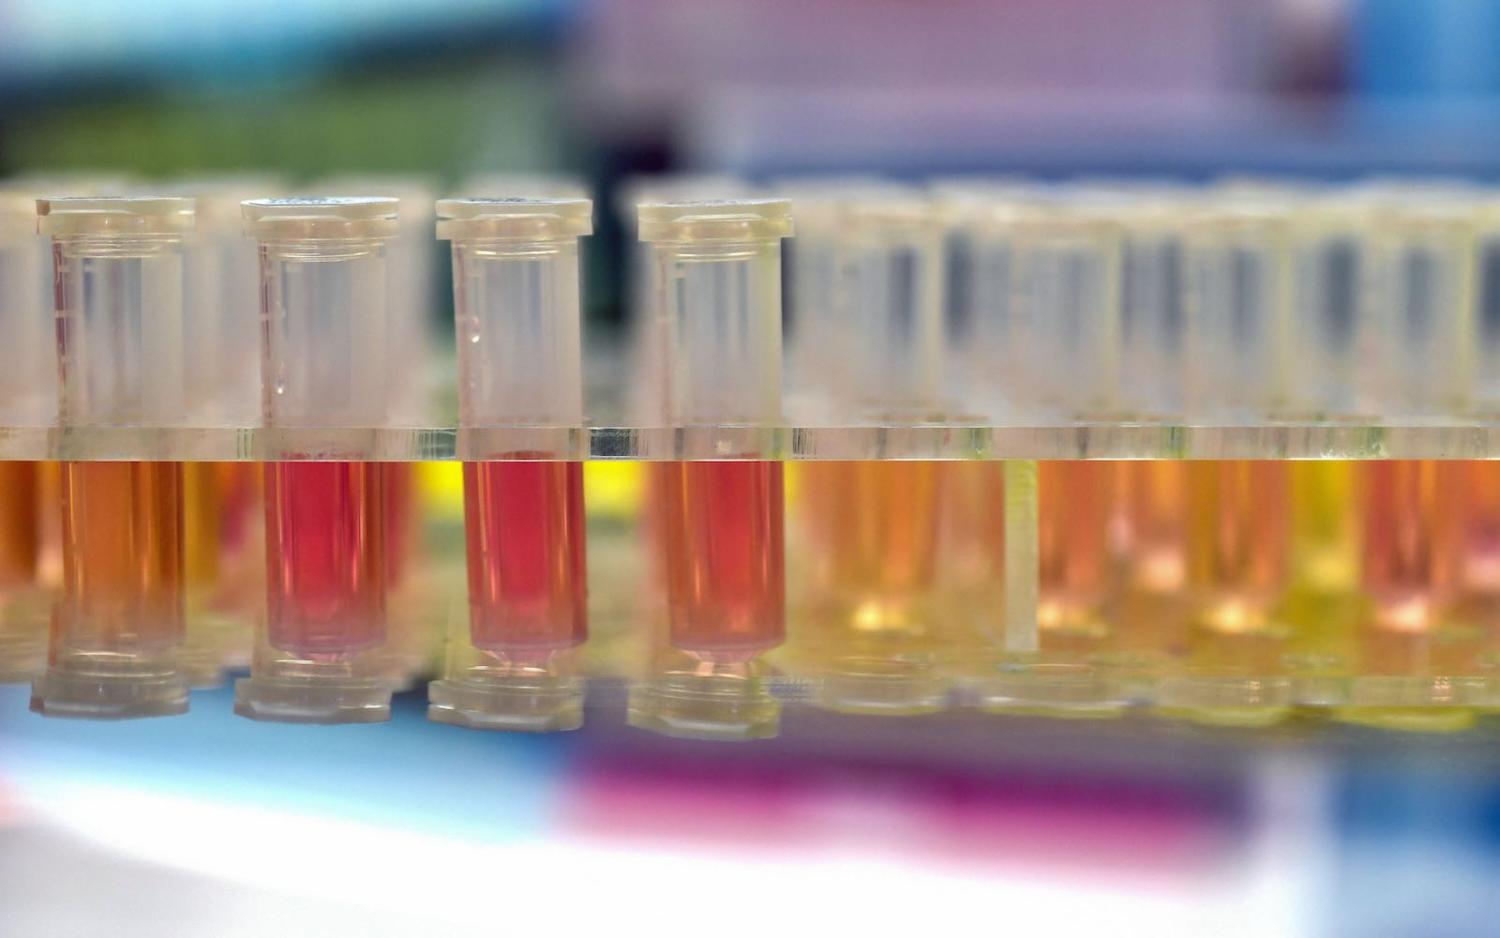 Samples to be tested for coronavirus at the “Fire Eye” laboratory in Wuhan, China, 6 February (AFP via Getty Images)